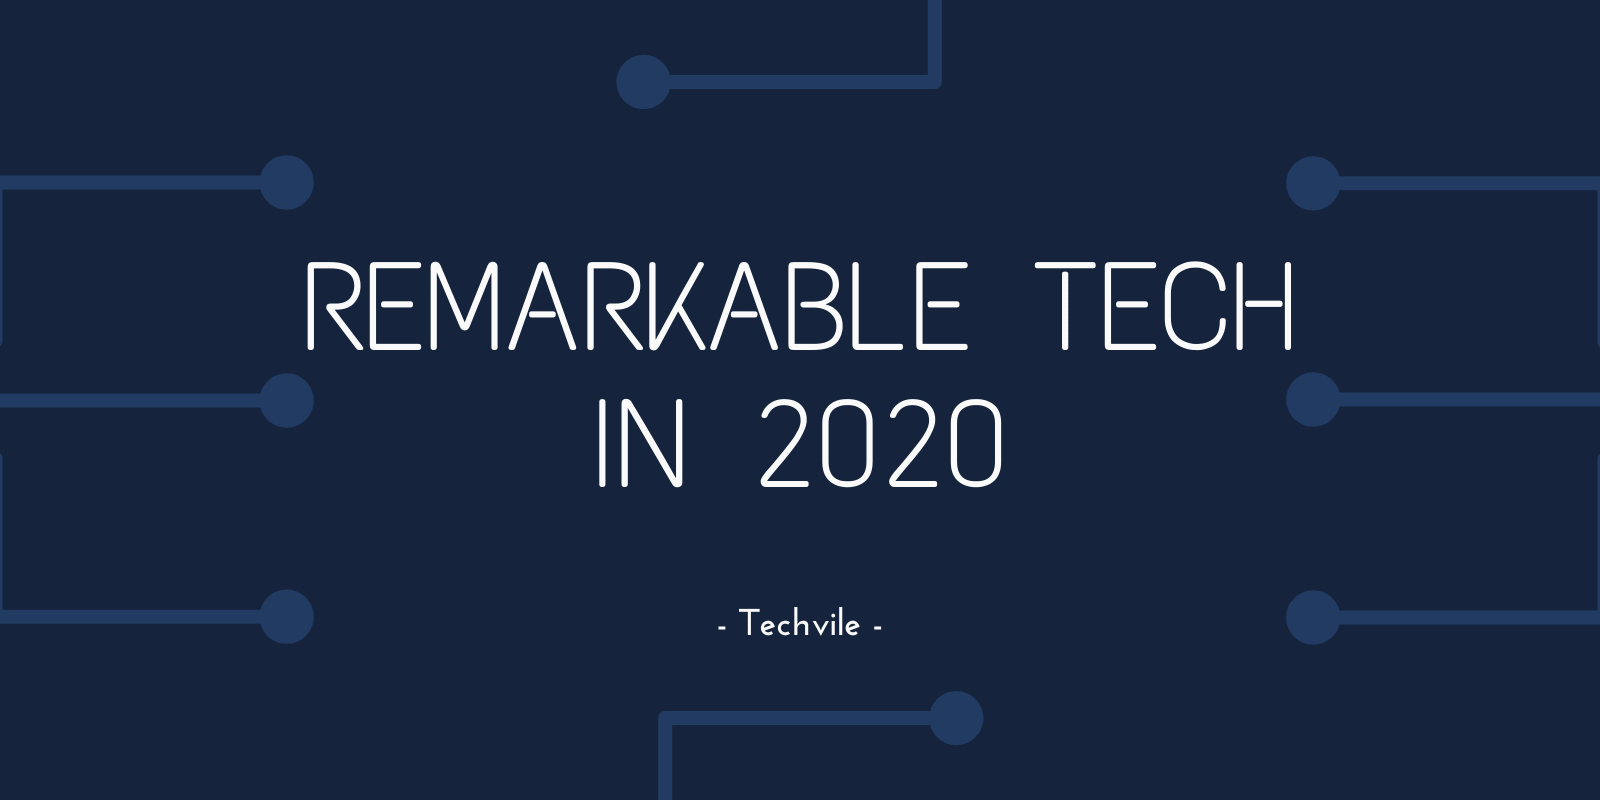 10 Technologies that Make 2020 a Remarkable Year